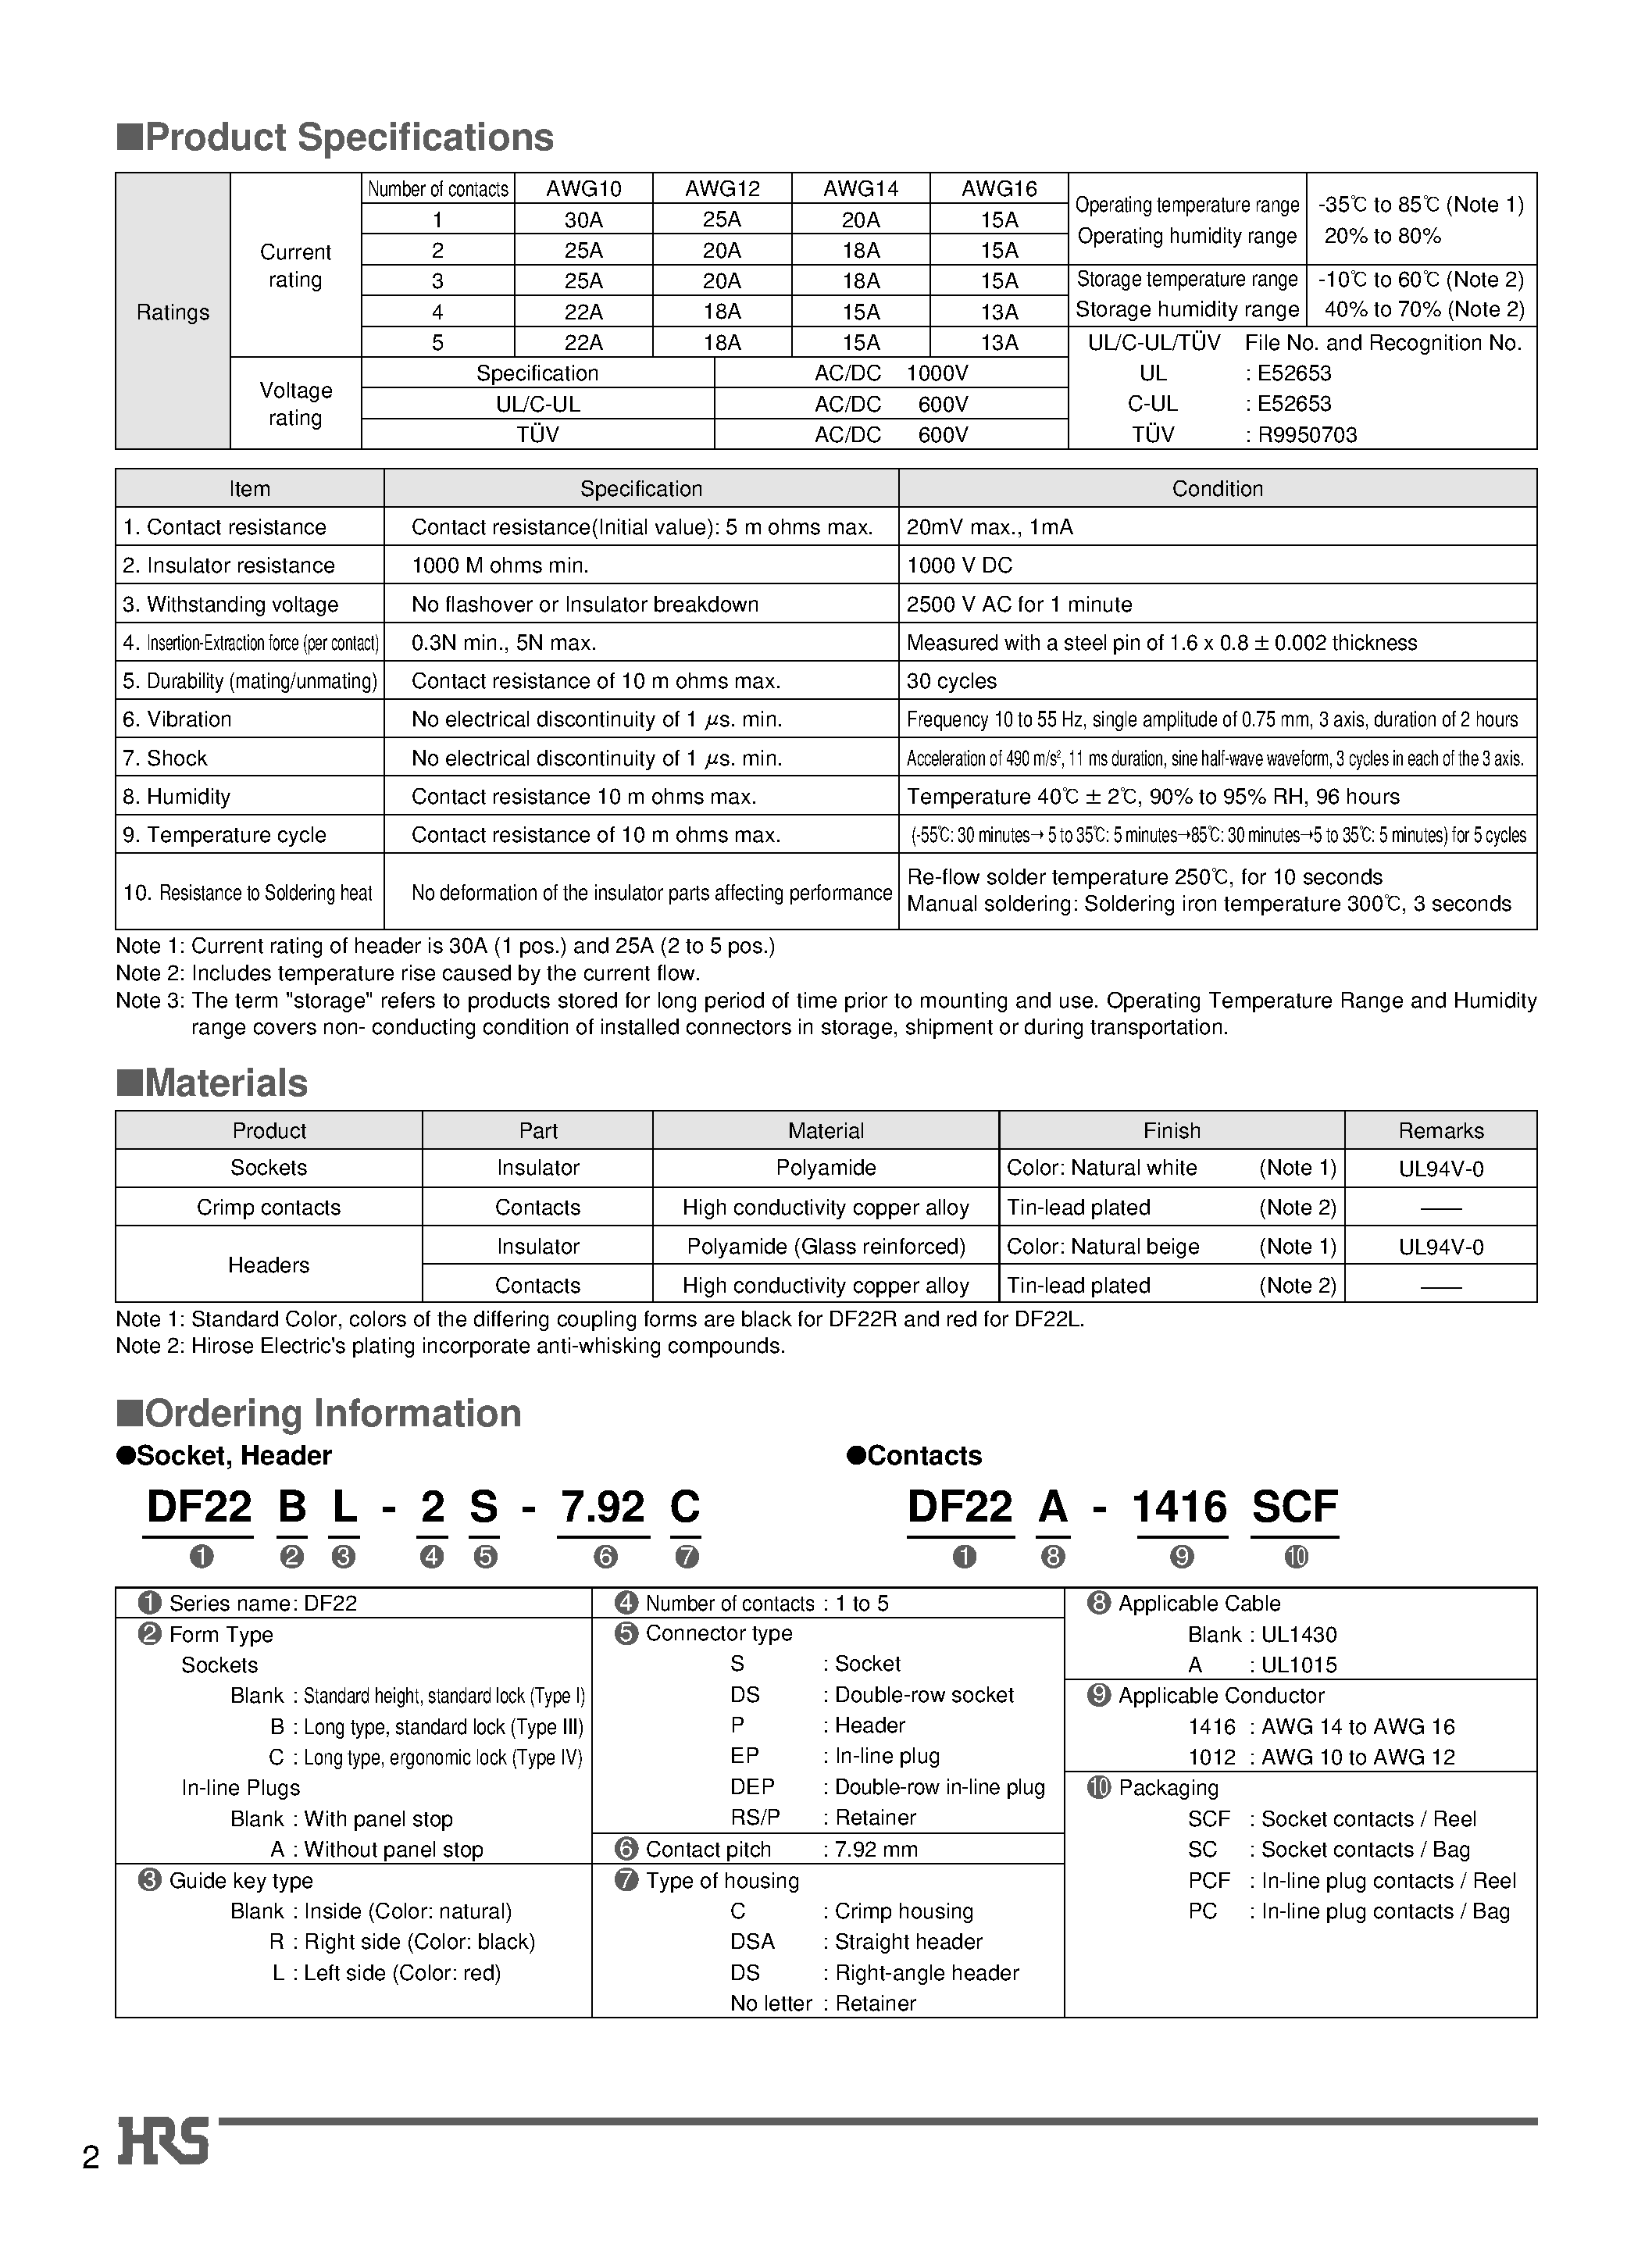 Datasheet DF22-5EP-7.92C - 7.92 mm Contact Pitch/ High-Current Connectors for Internal Power Supplies (UL/ C-UL and TUV Listed) page 2